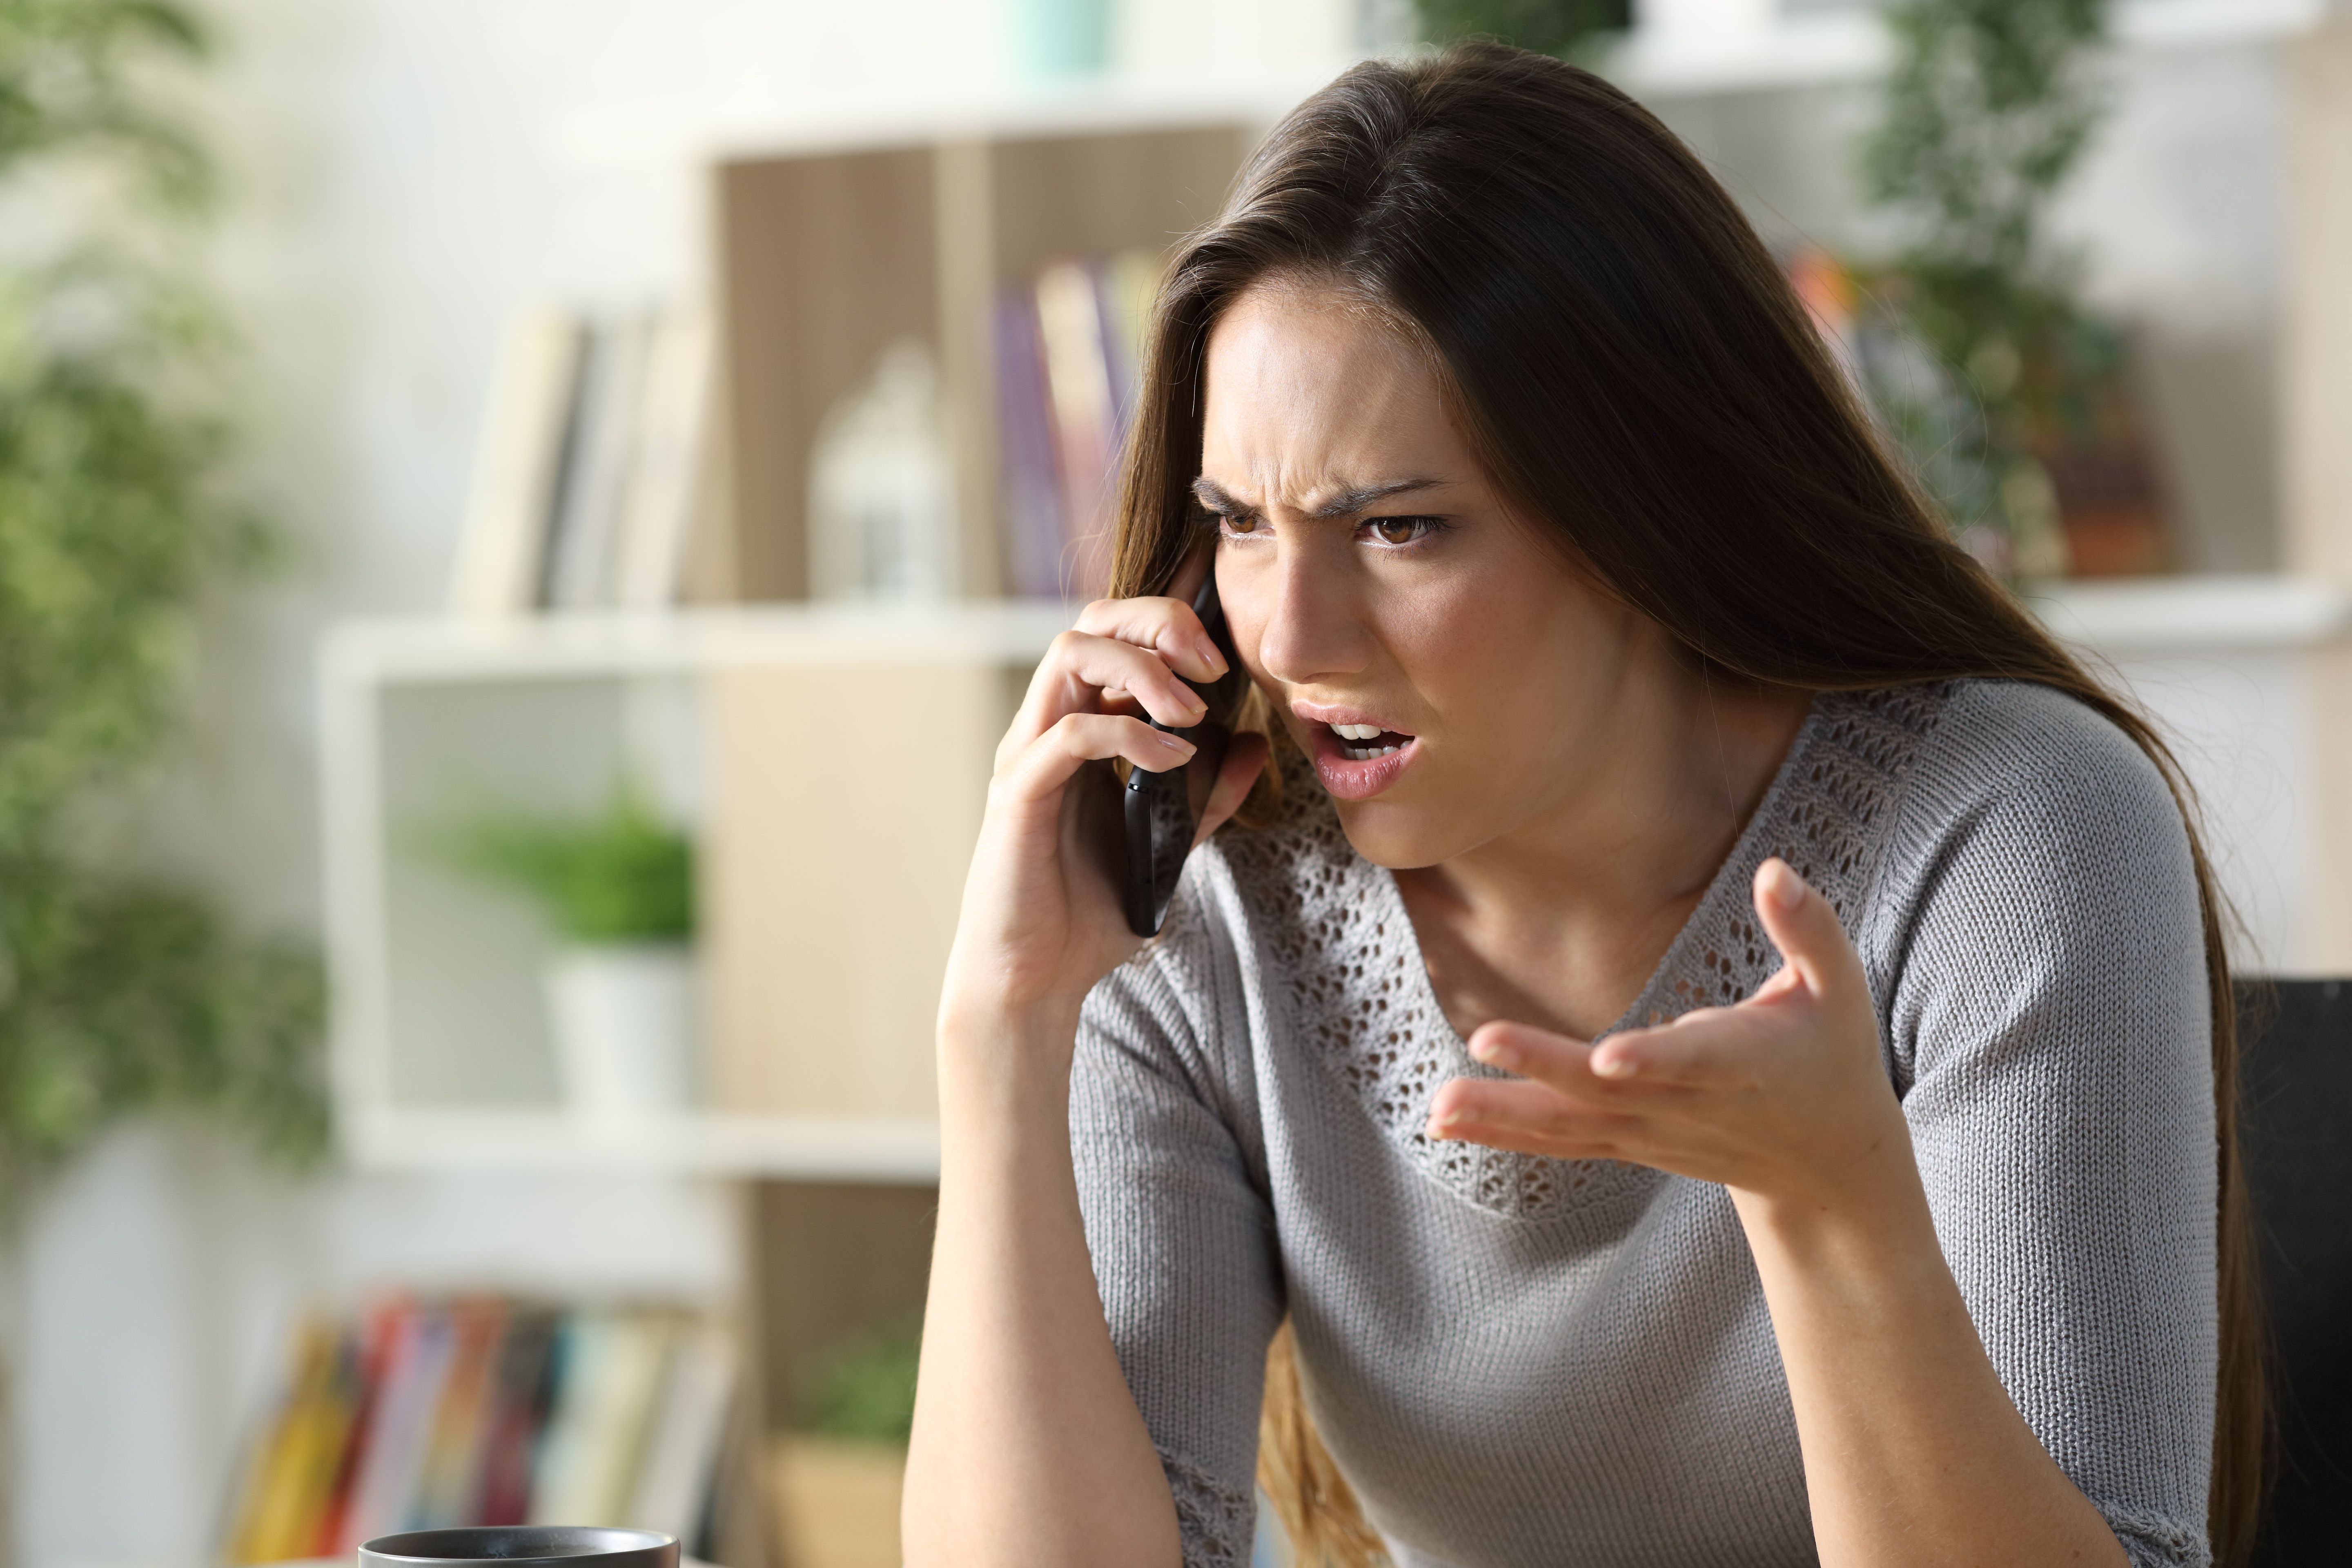 An upset woman on the phone. | Source: Getty Images